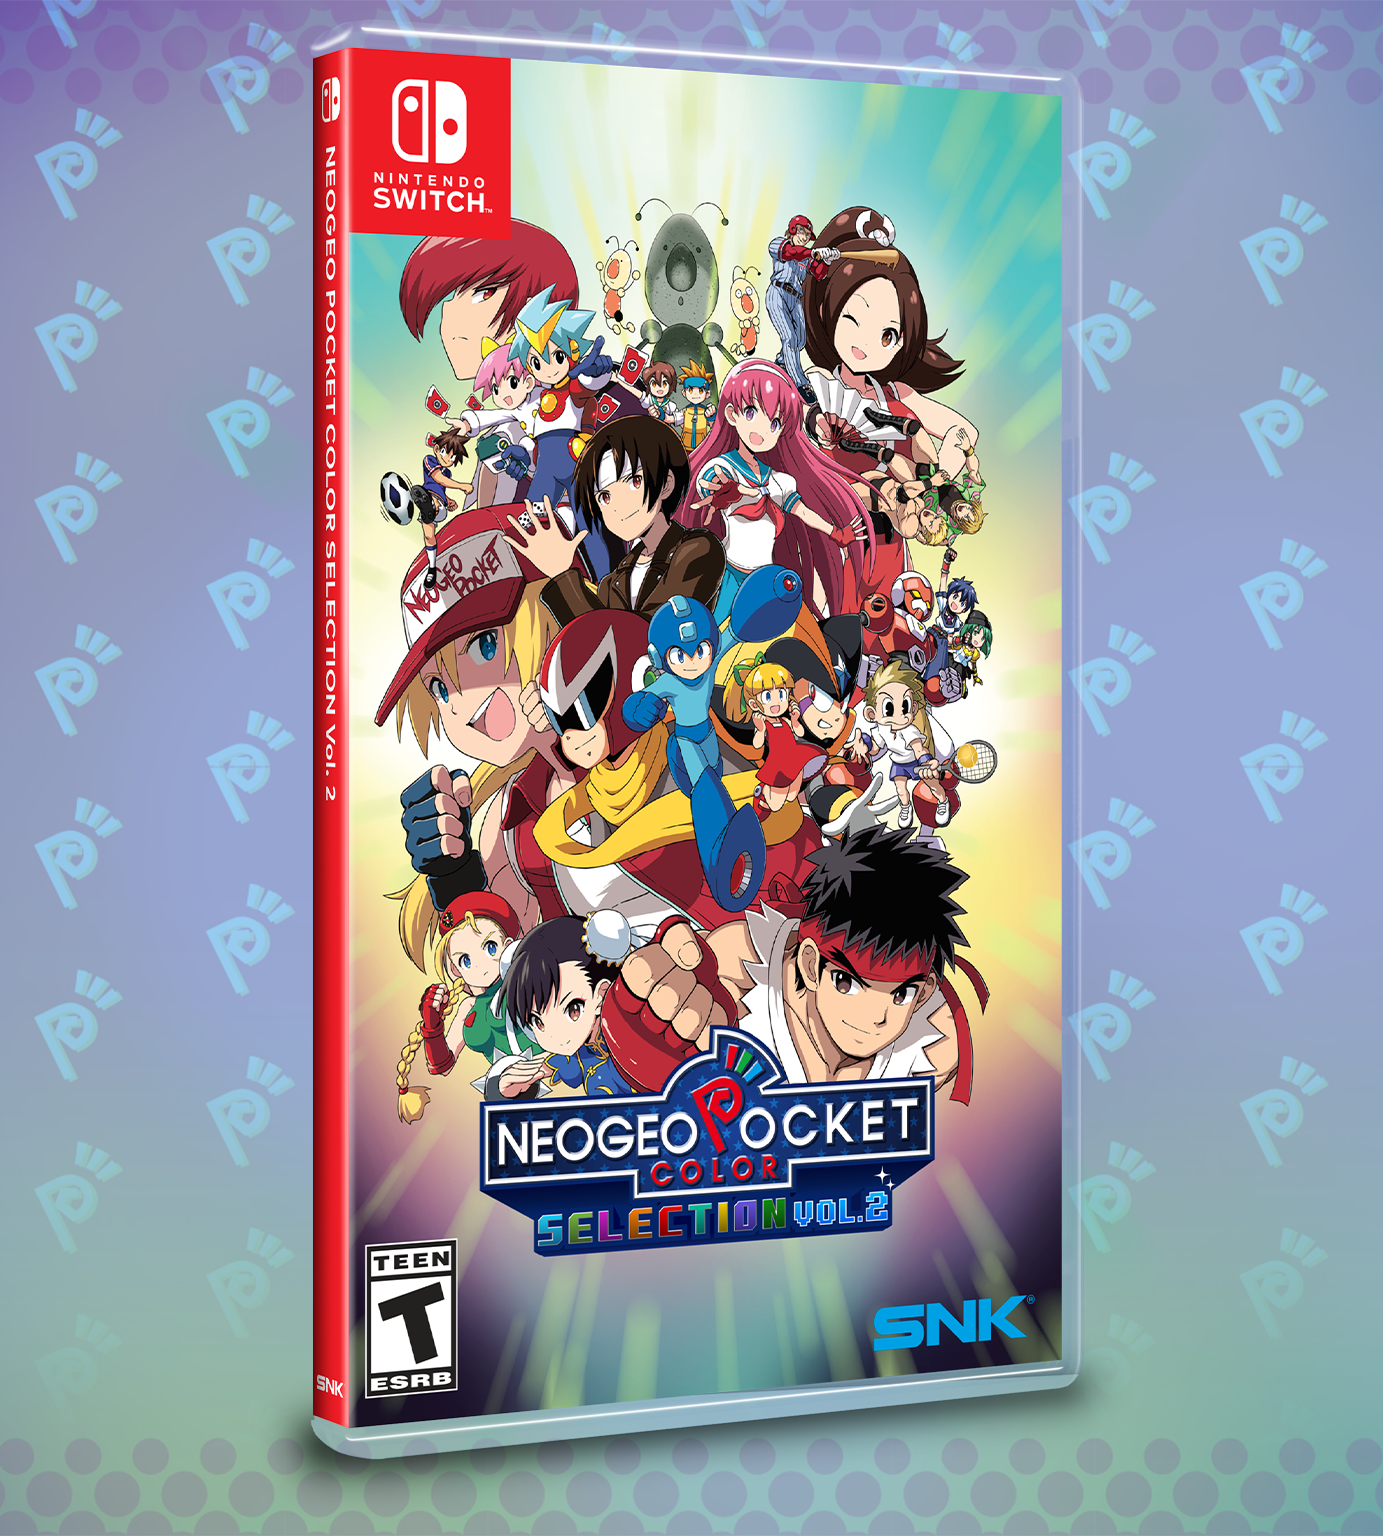 NeoGeo Pocket Color Selection Vol. 2 (ASIAN ENGLISH IMPORT) - SWITCH